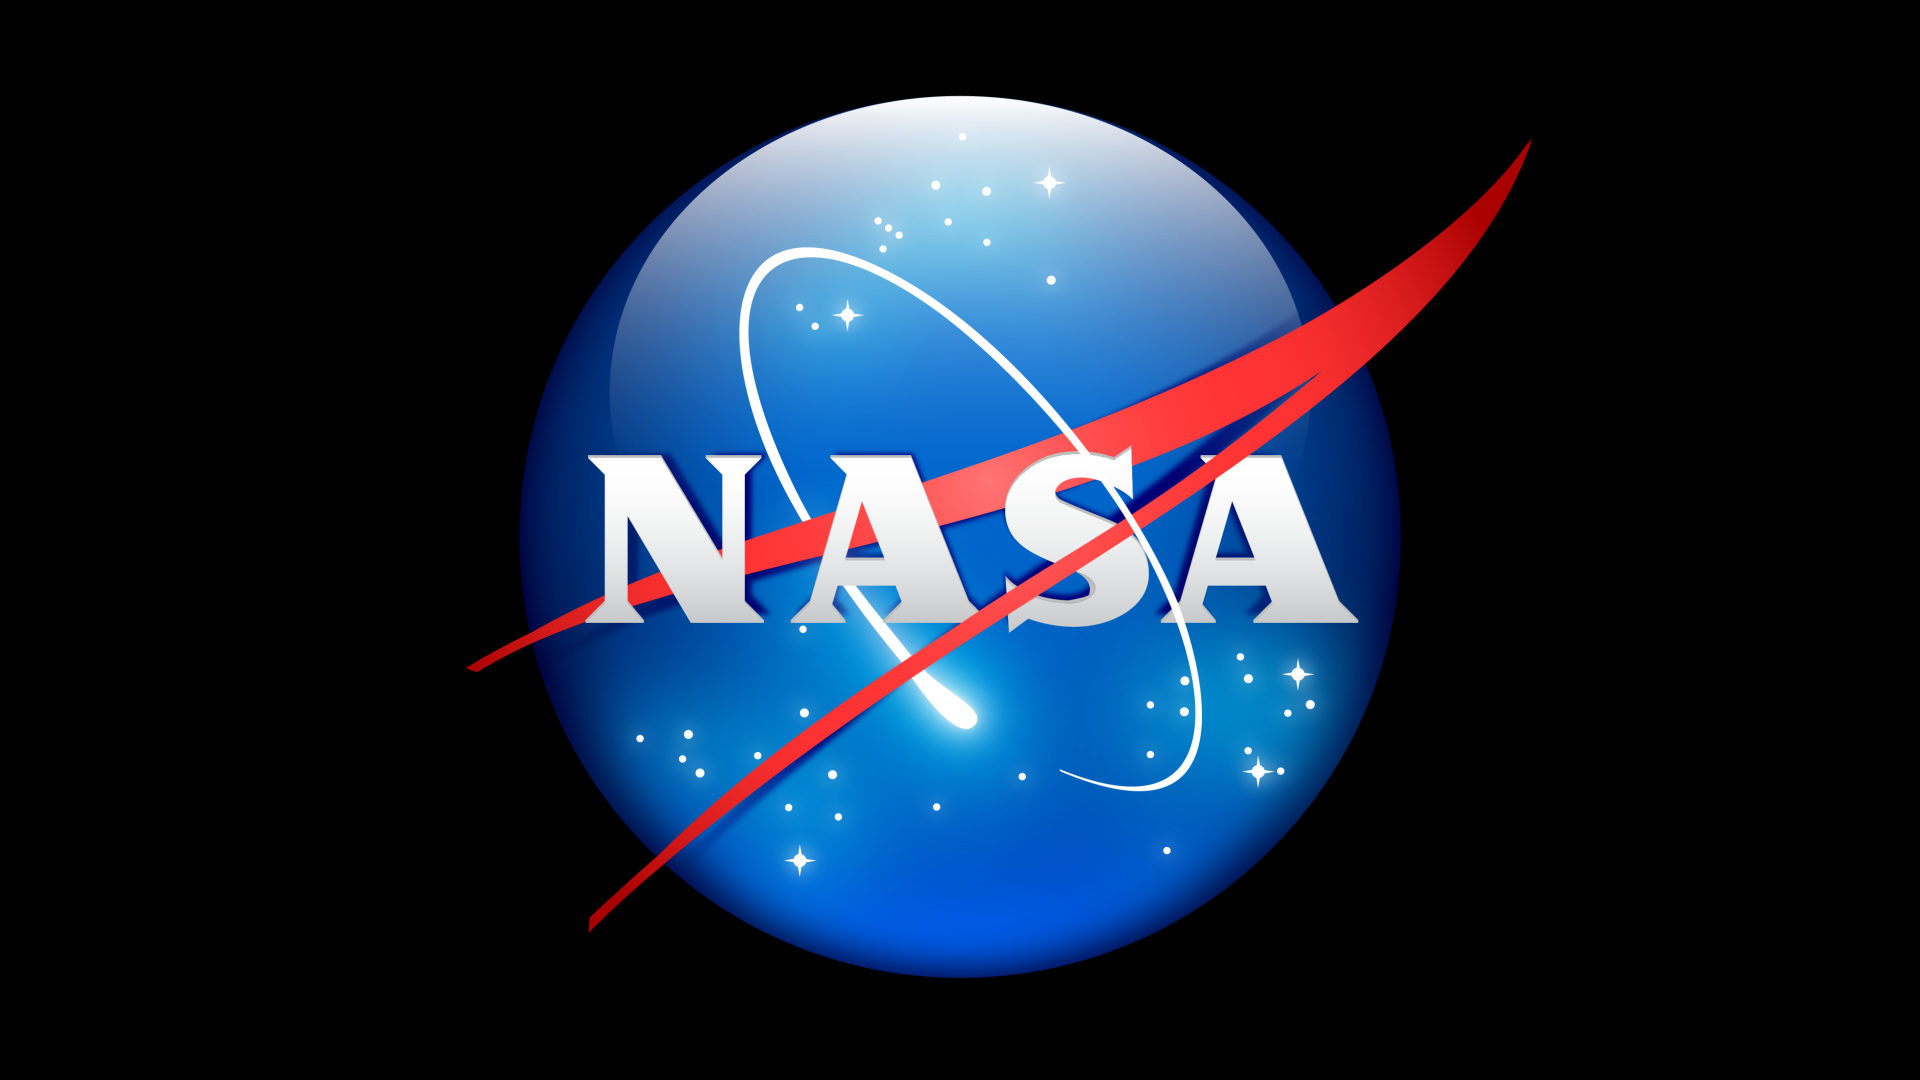 Background Nasa Wallpaper And Image Pictures Photos